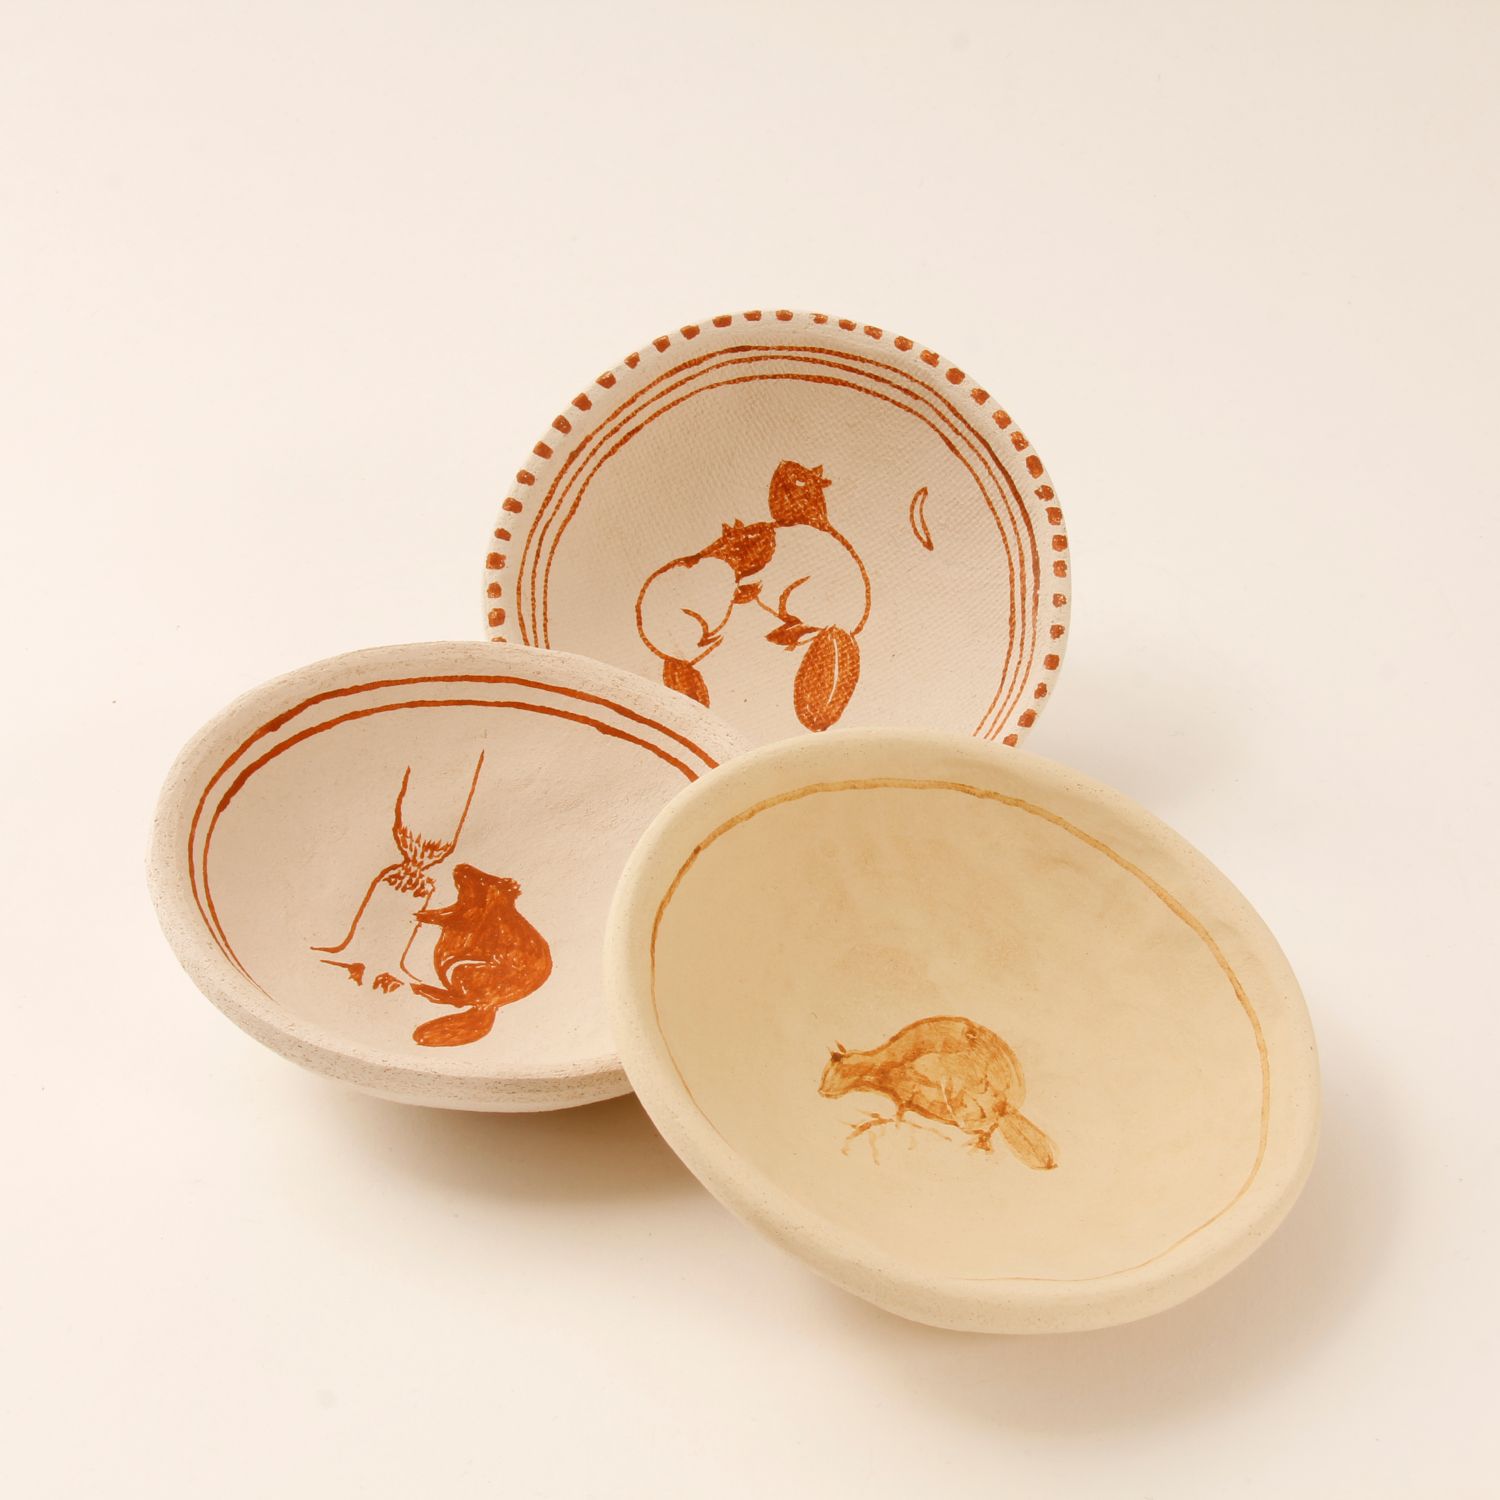 David Migwans: Assorted Beaver Bowl (Each sold separately) Product Image 1 of 2